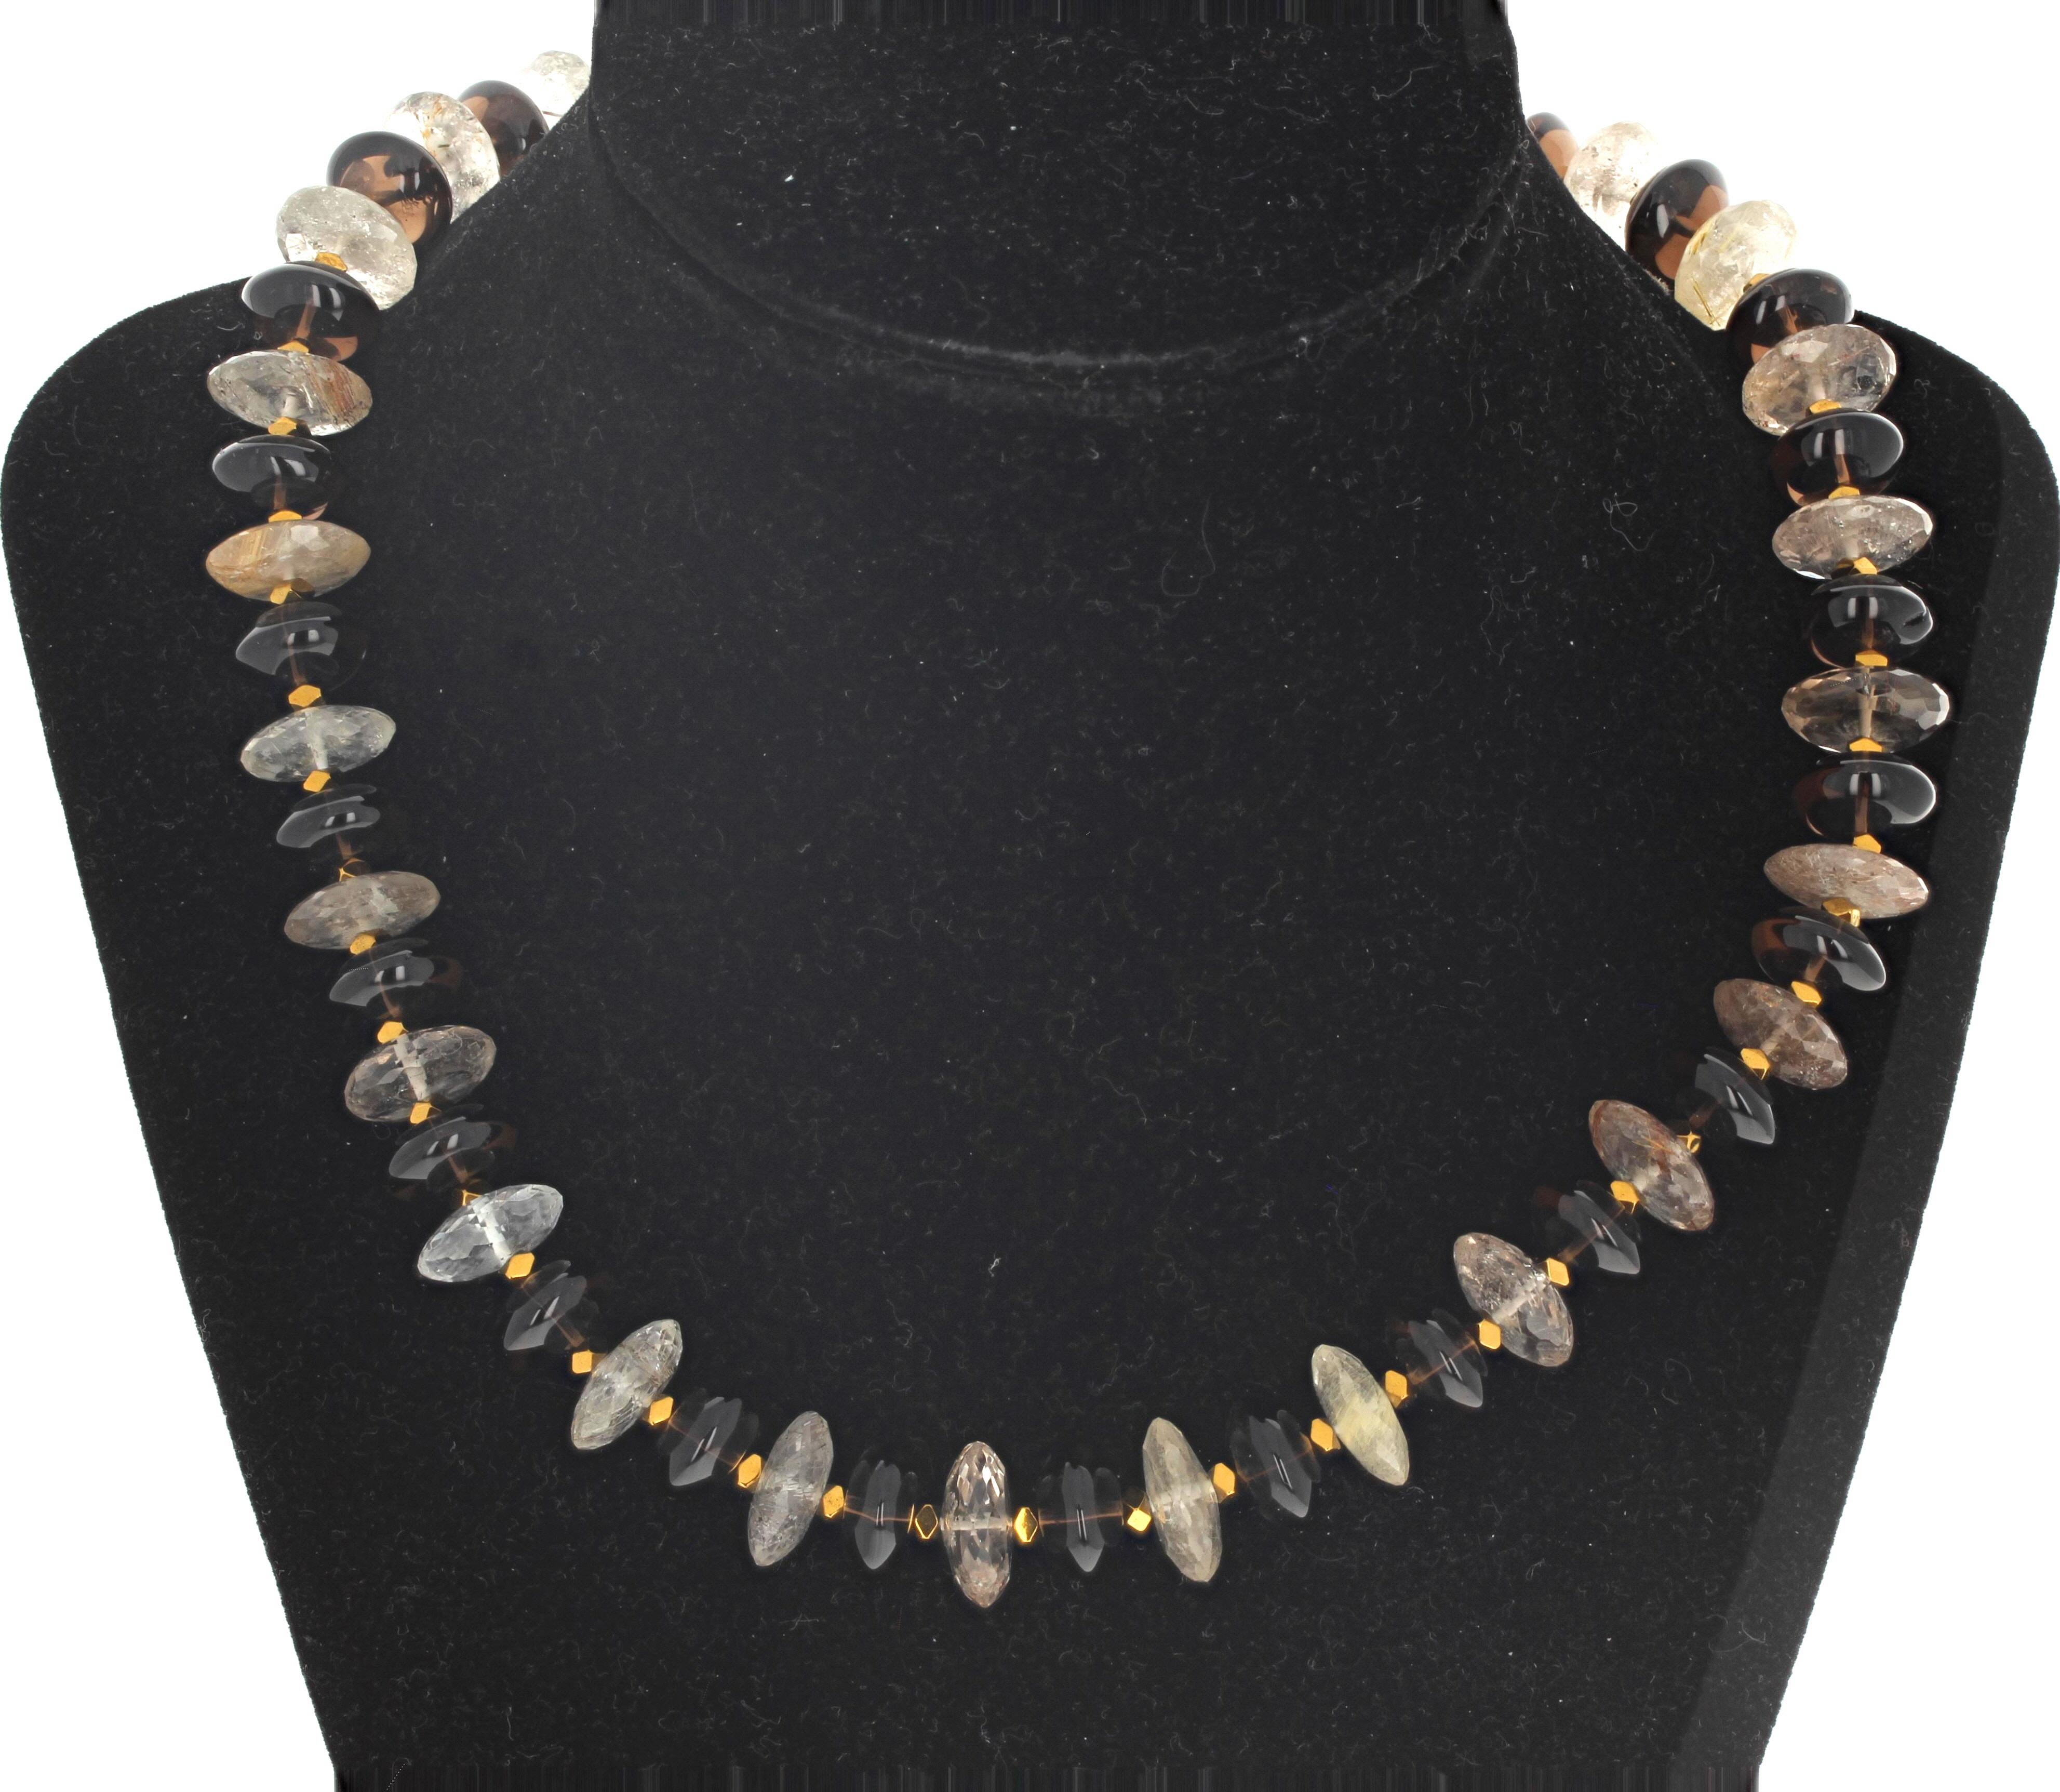 This lovely dinner time necklace is 17 3/4 inches long and glows beautifully when on your neck.  The highly polished natural Smoky Quartz are approximately 12mm and the fascinating real Rutilated Quartz are approximately 14mm.  The clasp is an easy